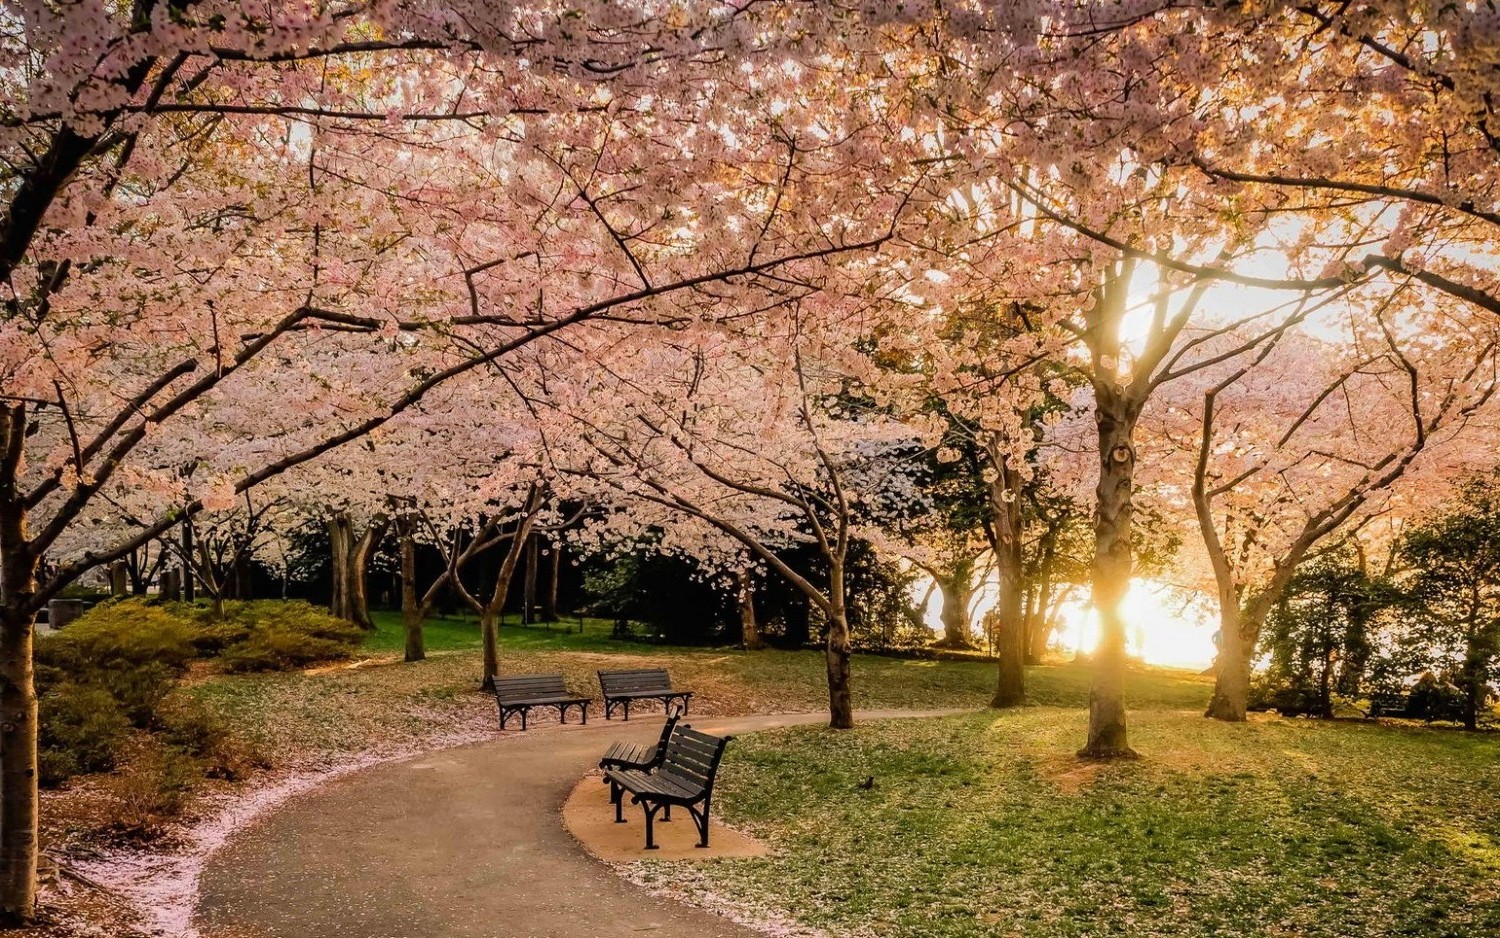 nature, Landscape, Park, Lawns, Bench, Trees, Sunset, Cherry Blossom, Flowers, Path, Pink Wallpaper